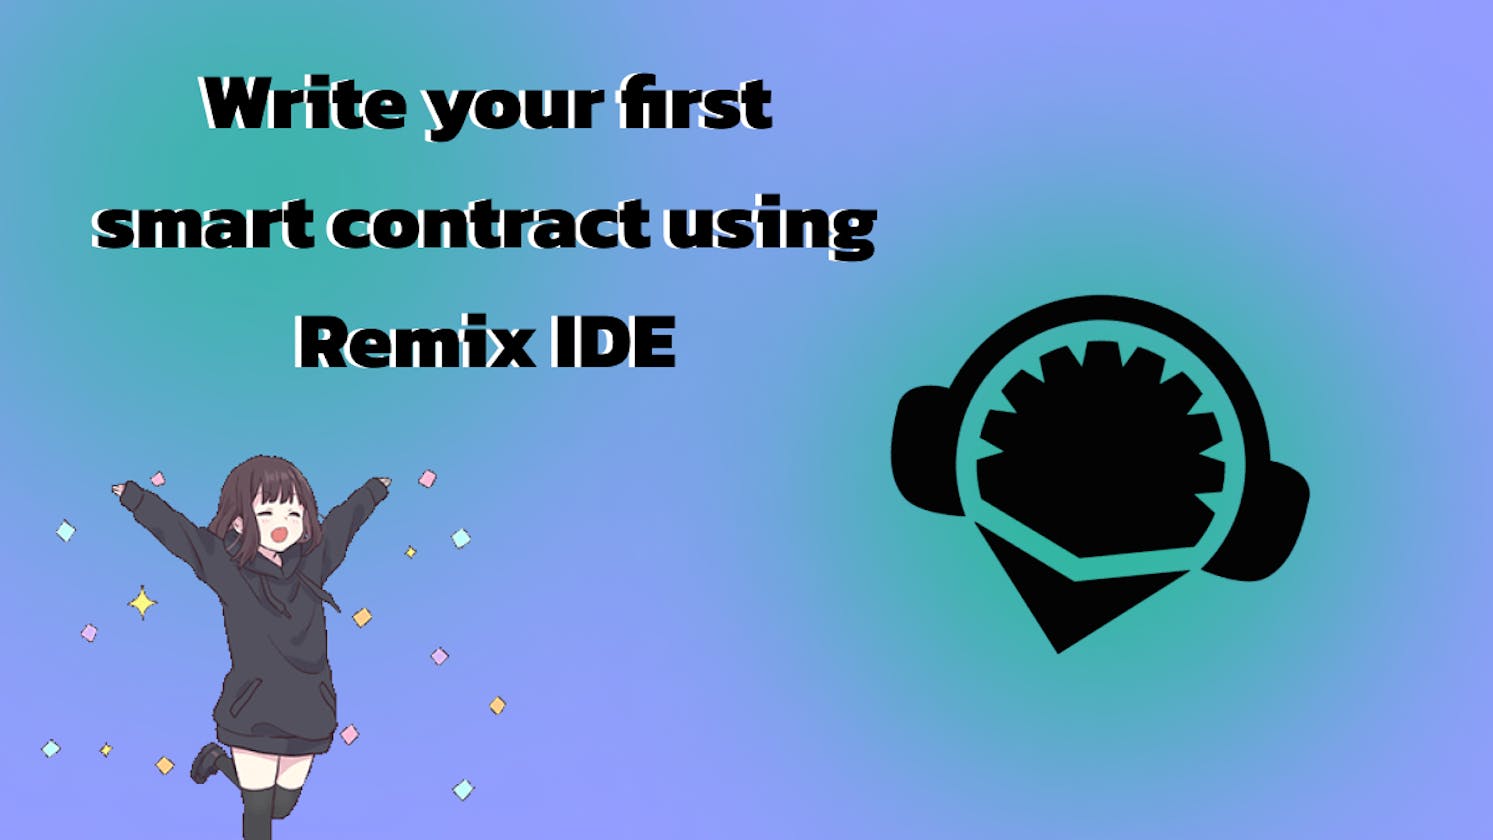 Write your first smart contract using Remix IDE